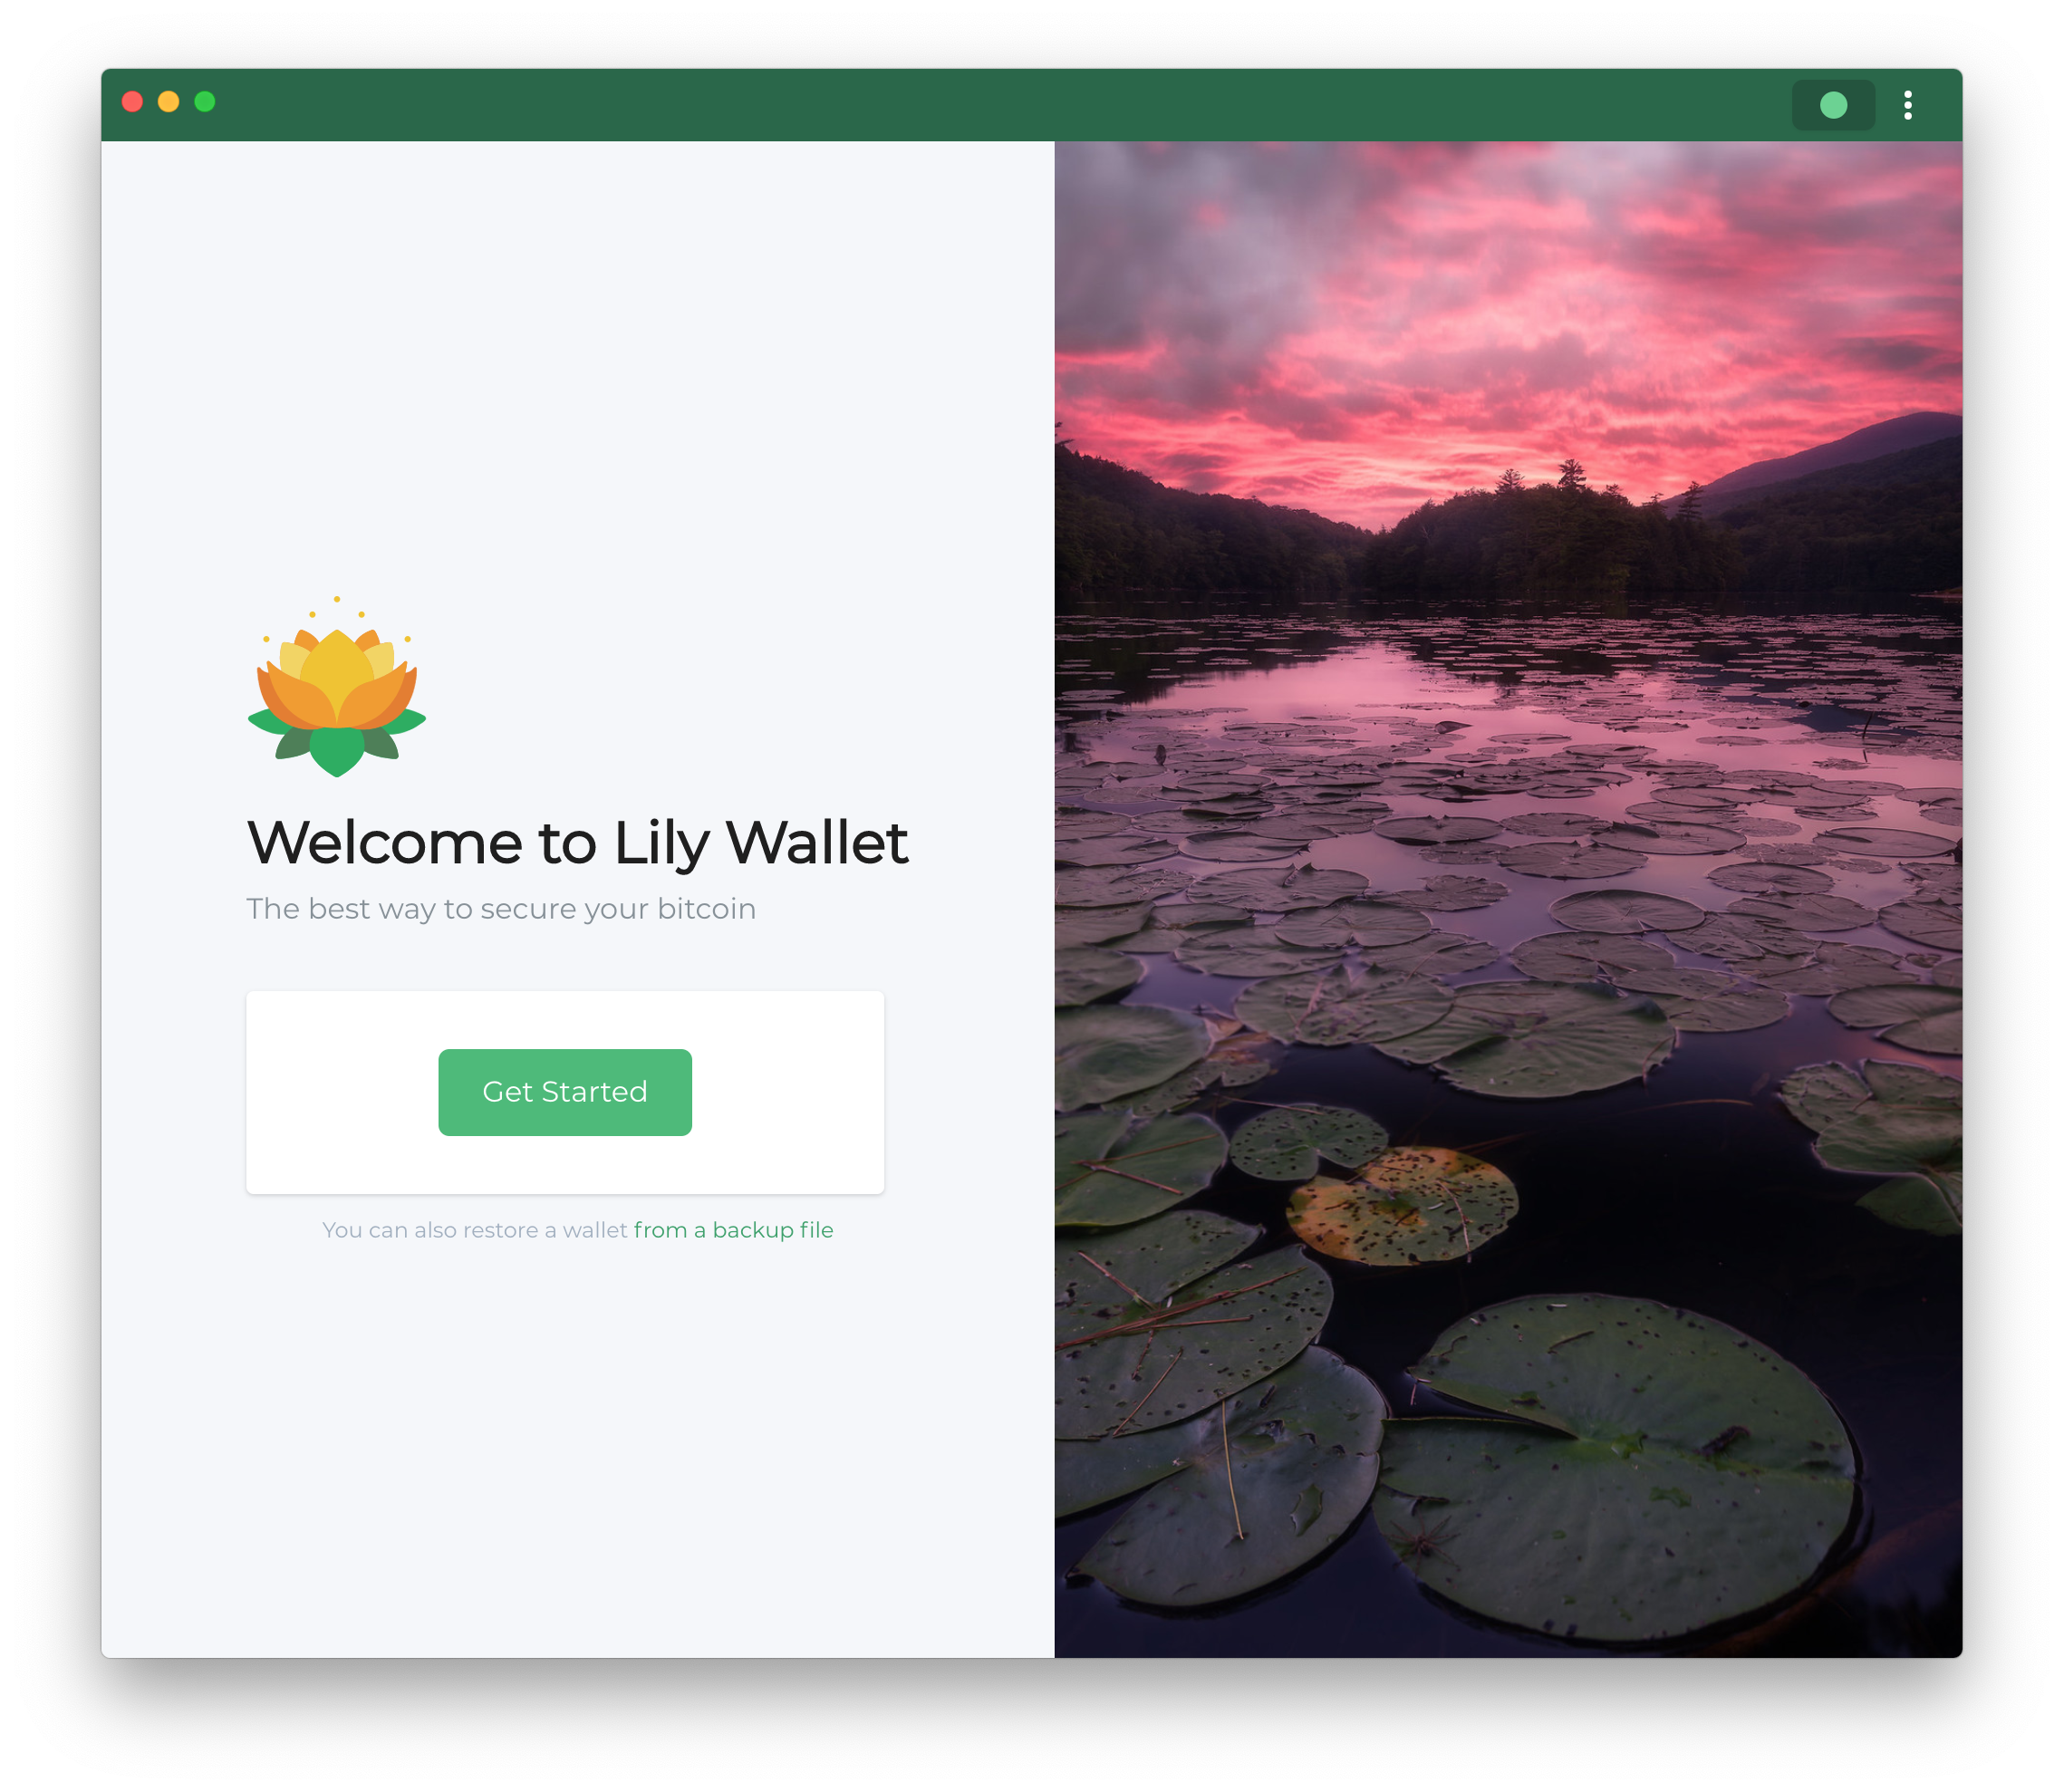 Get started with Lily Wallet